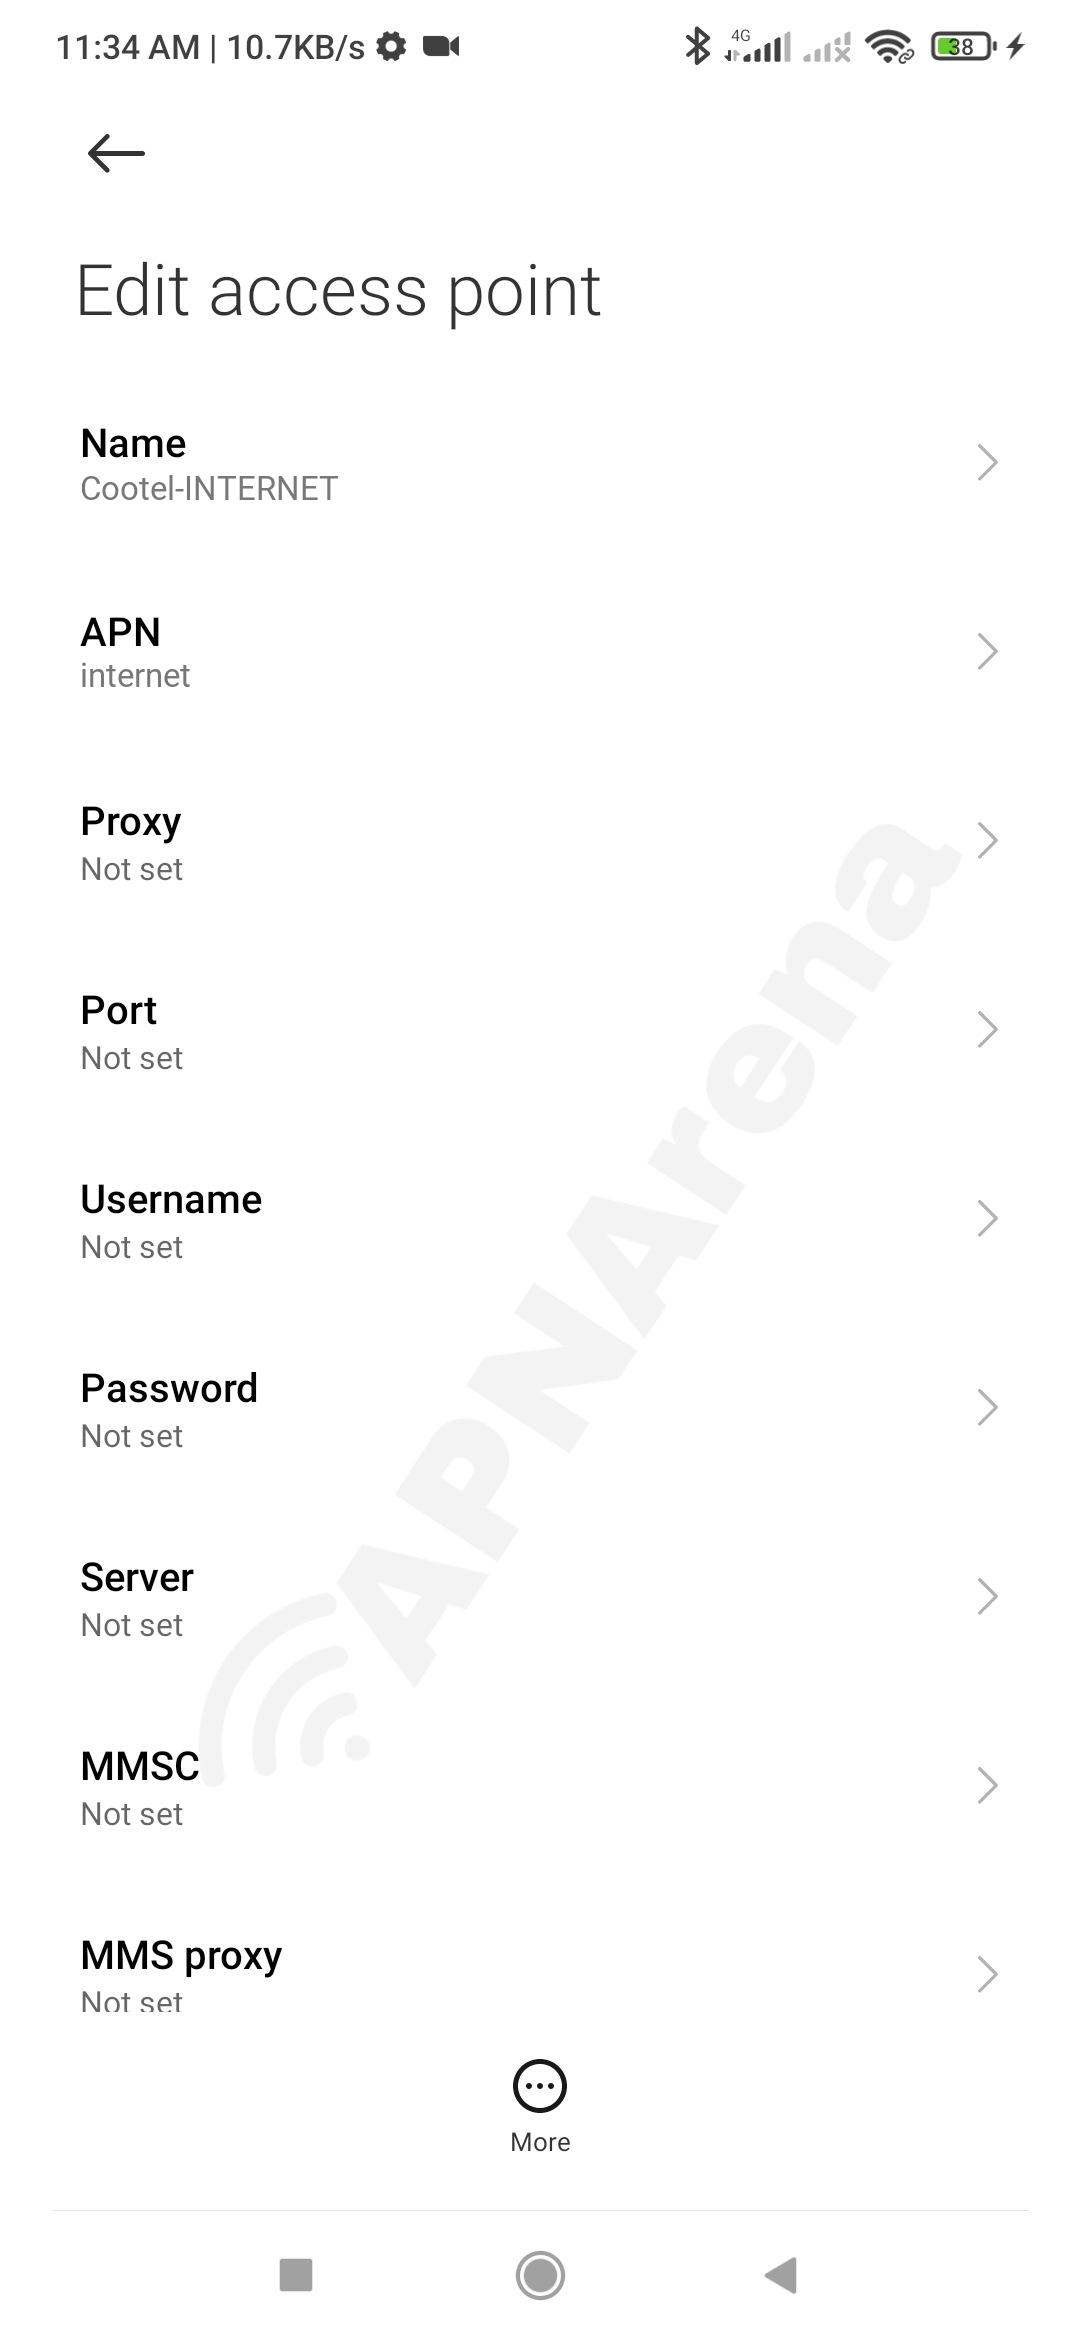 CooTel APN Settings for Android